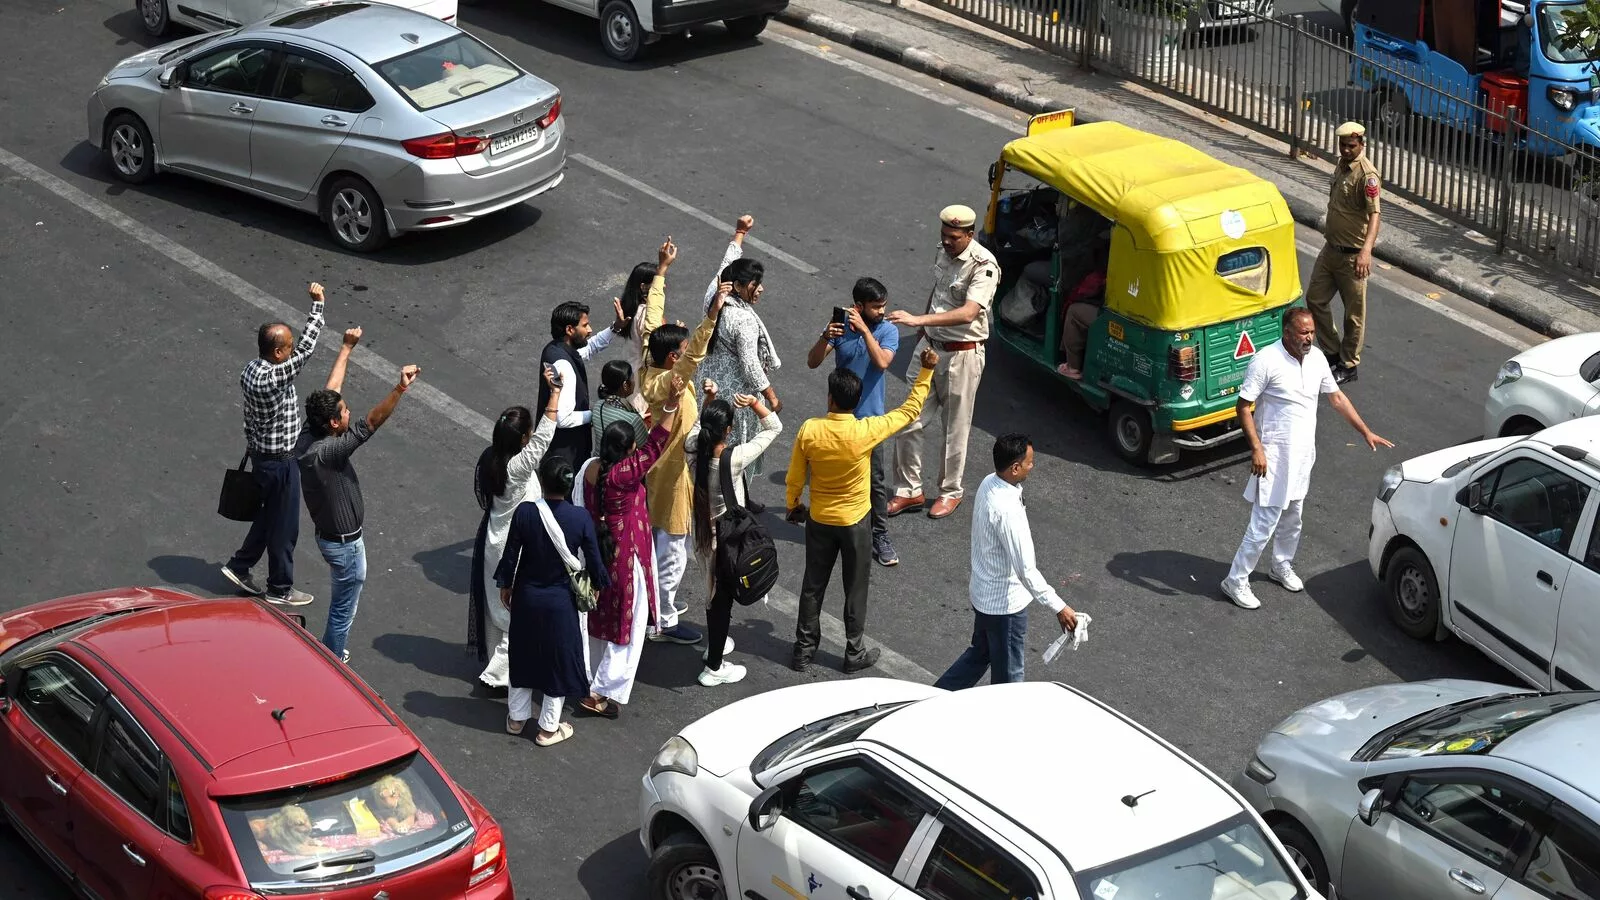 AAP protest: Delhi Police issues traffic advisory on roads to avoid